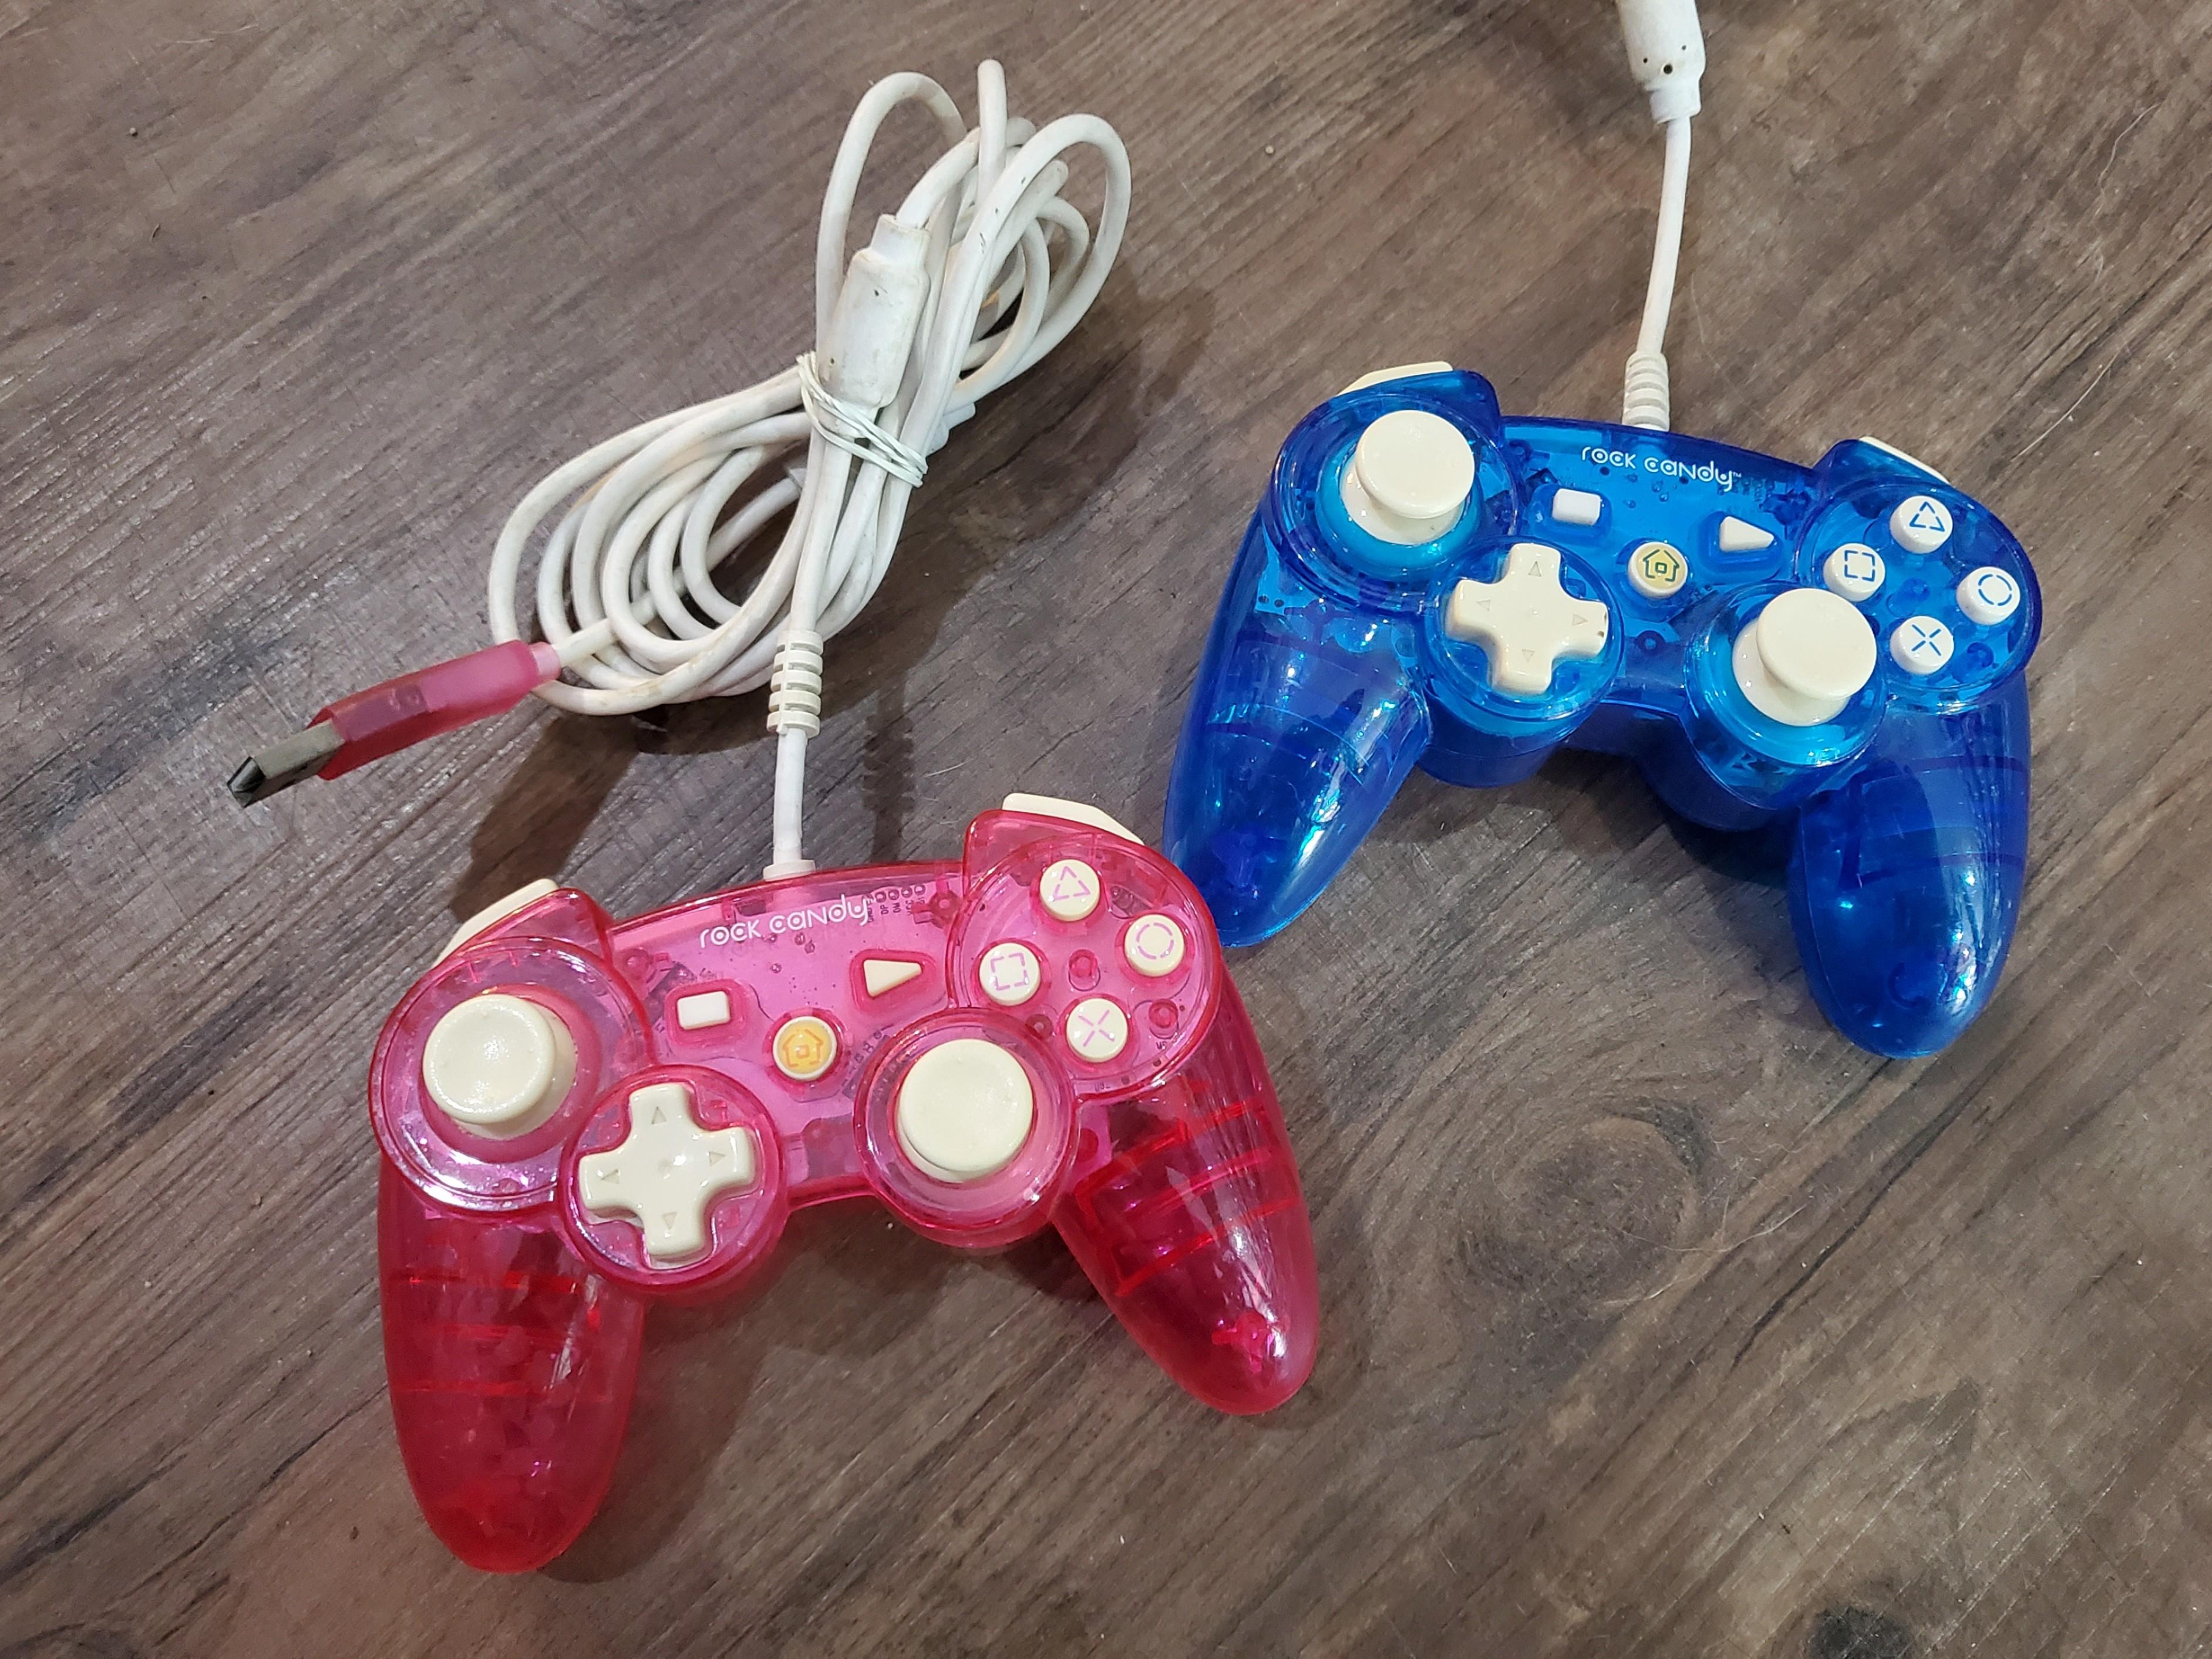 candy pink ps3 controller